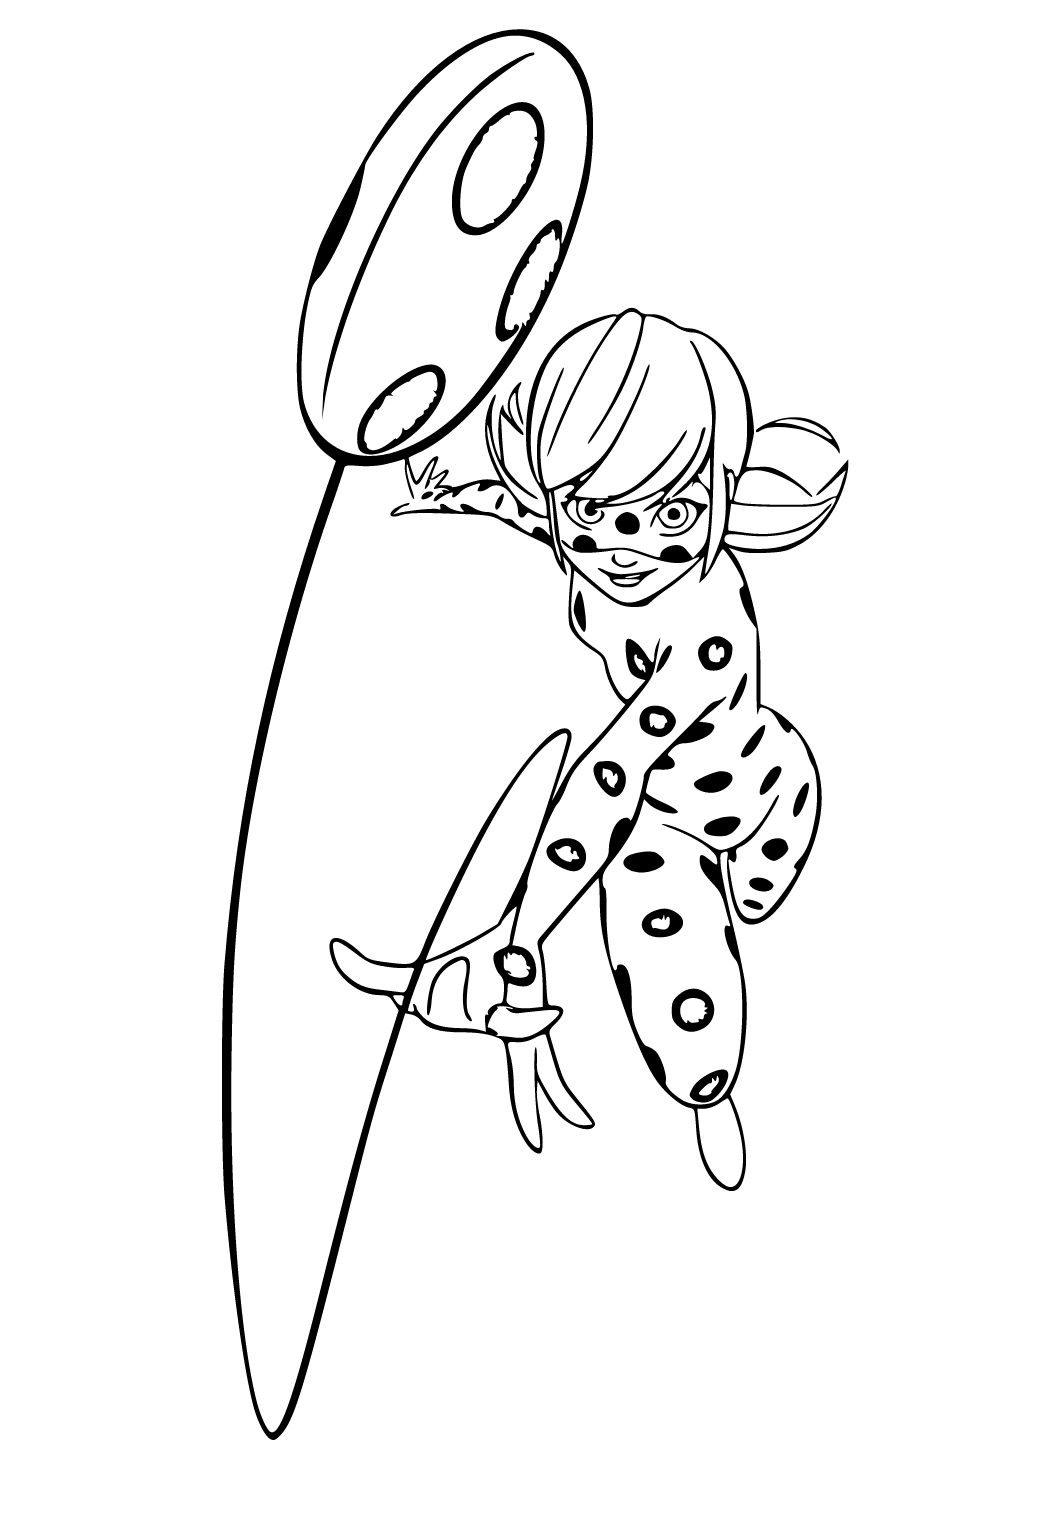 Free Printable Miraculous Ladybug Hit Coloring Page for Adults and Kids -  